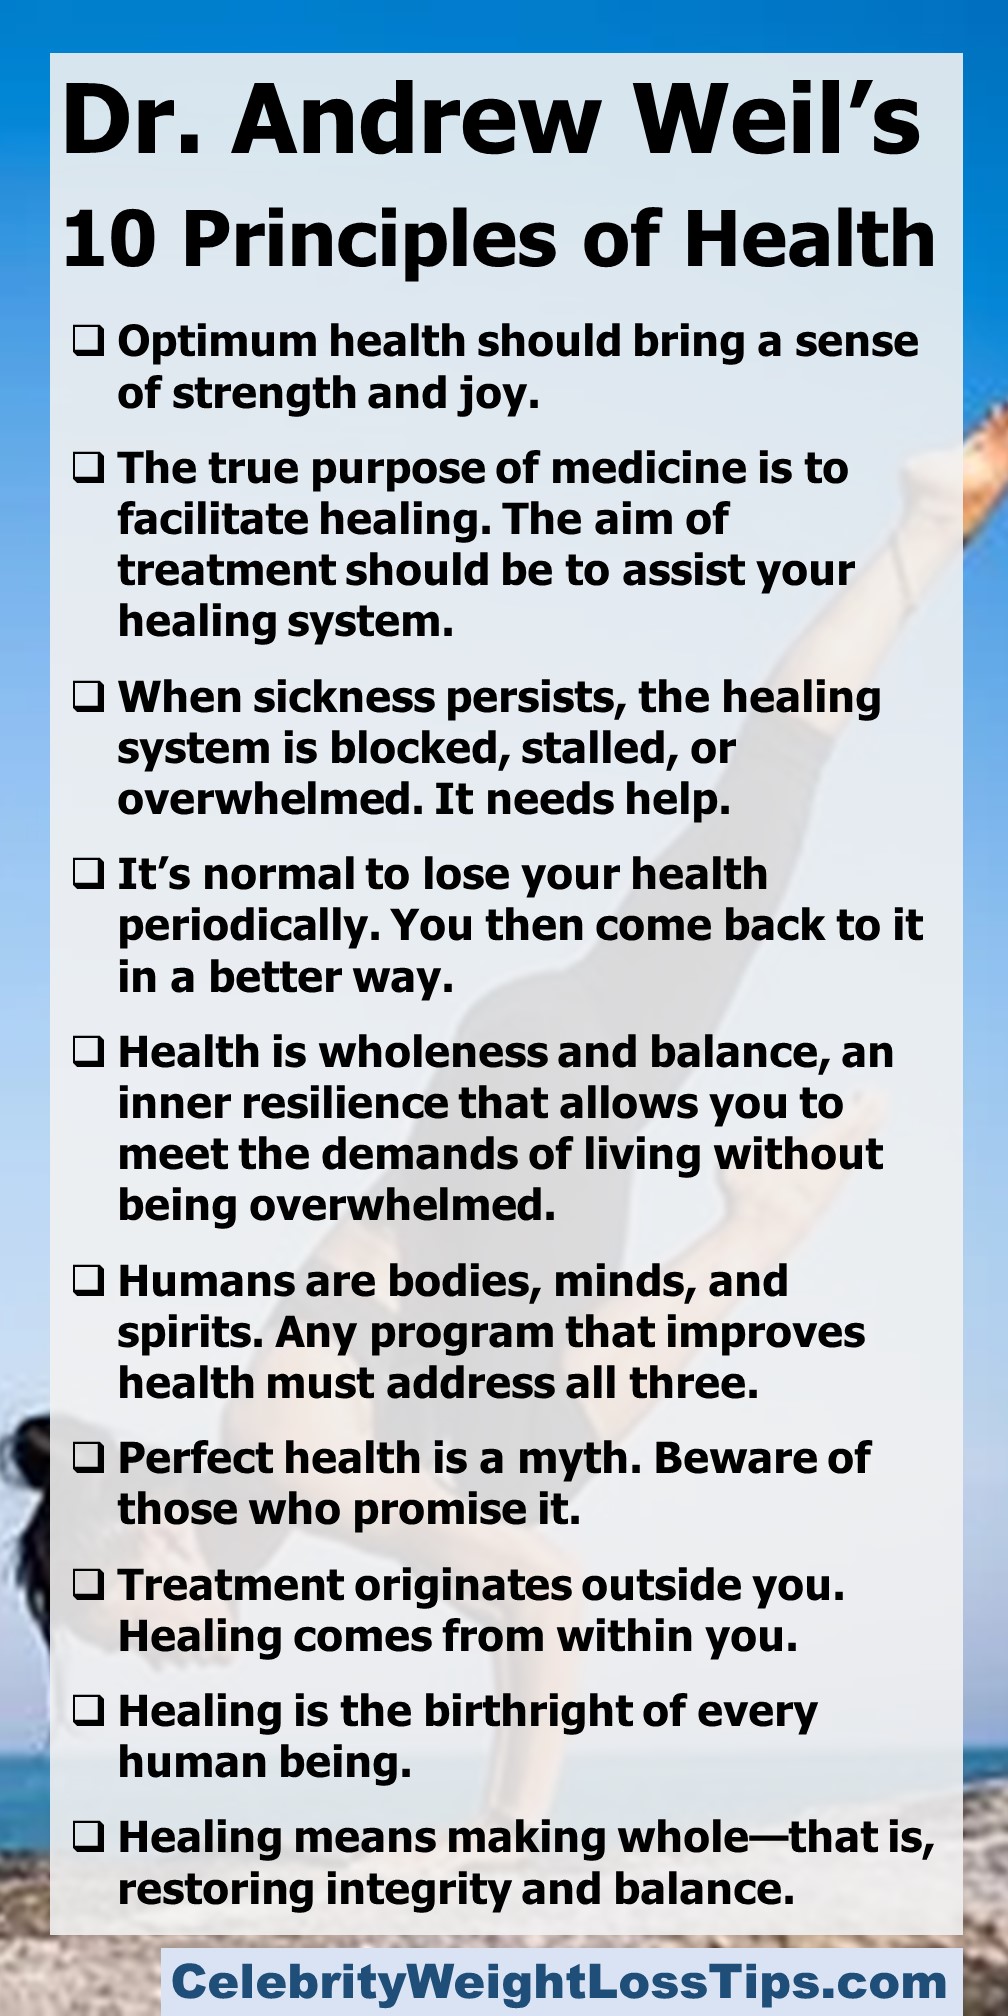 Dr Andrew Weil's 10 Principles of Health